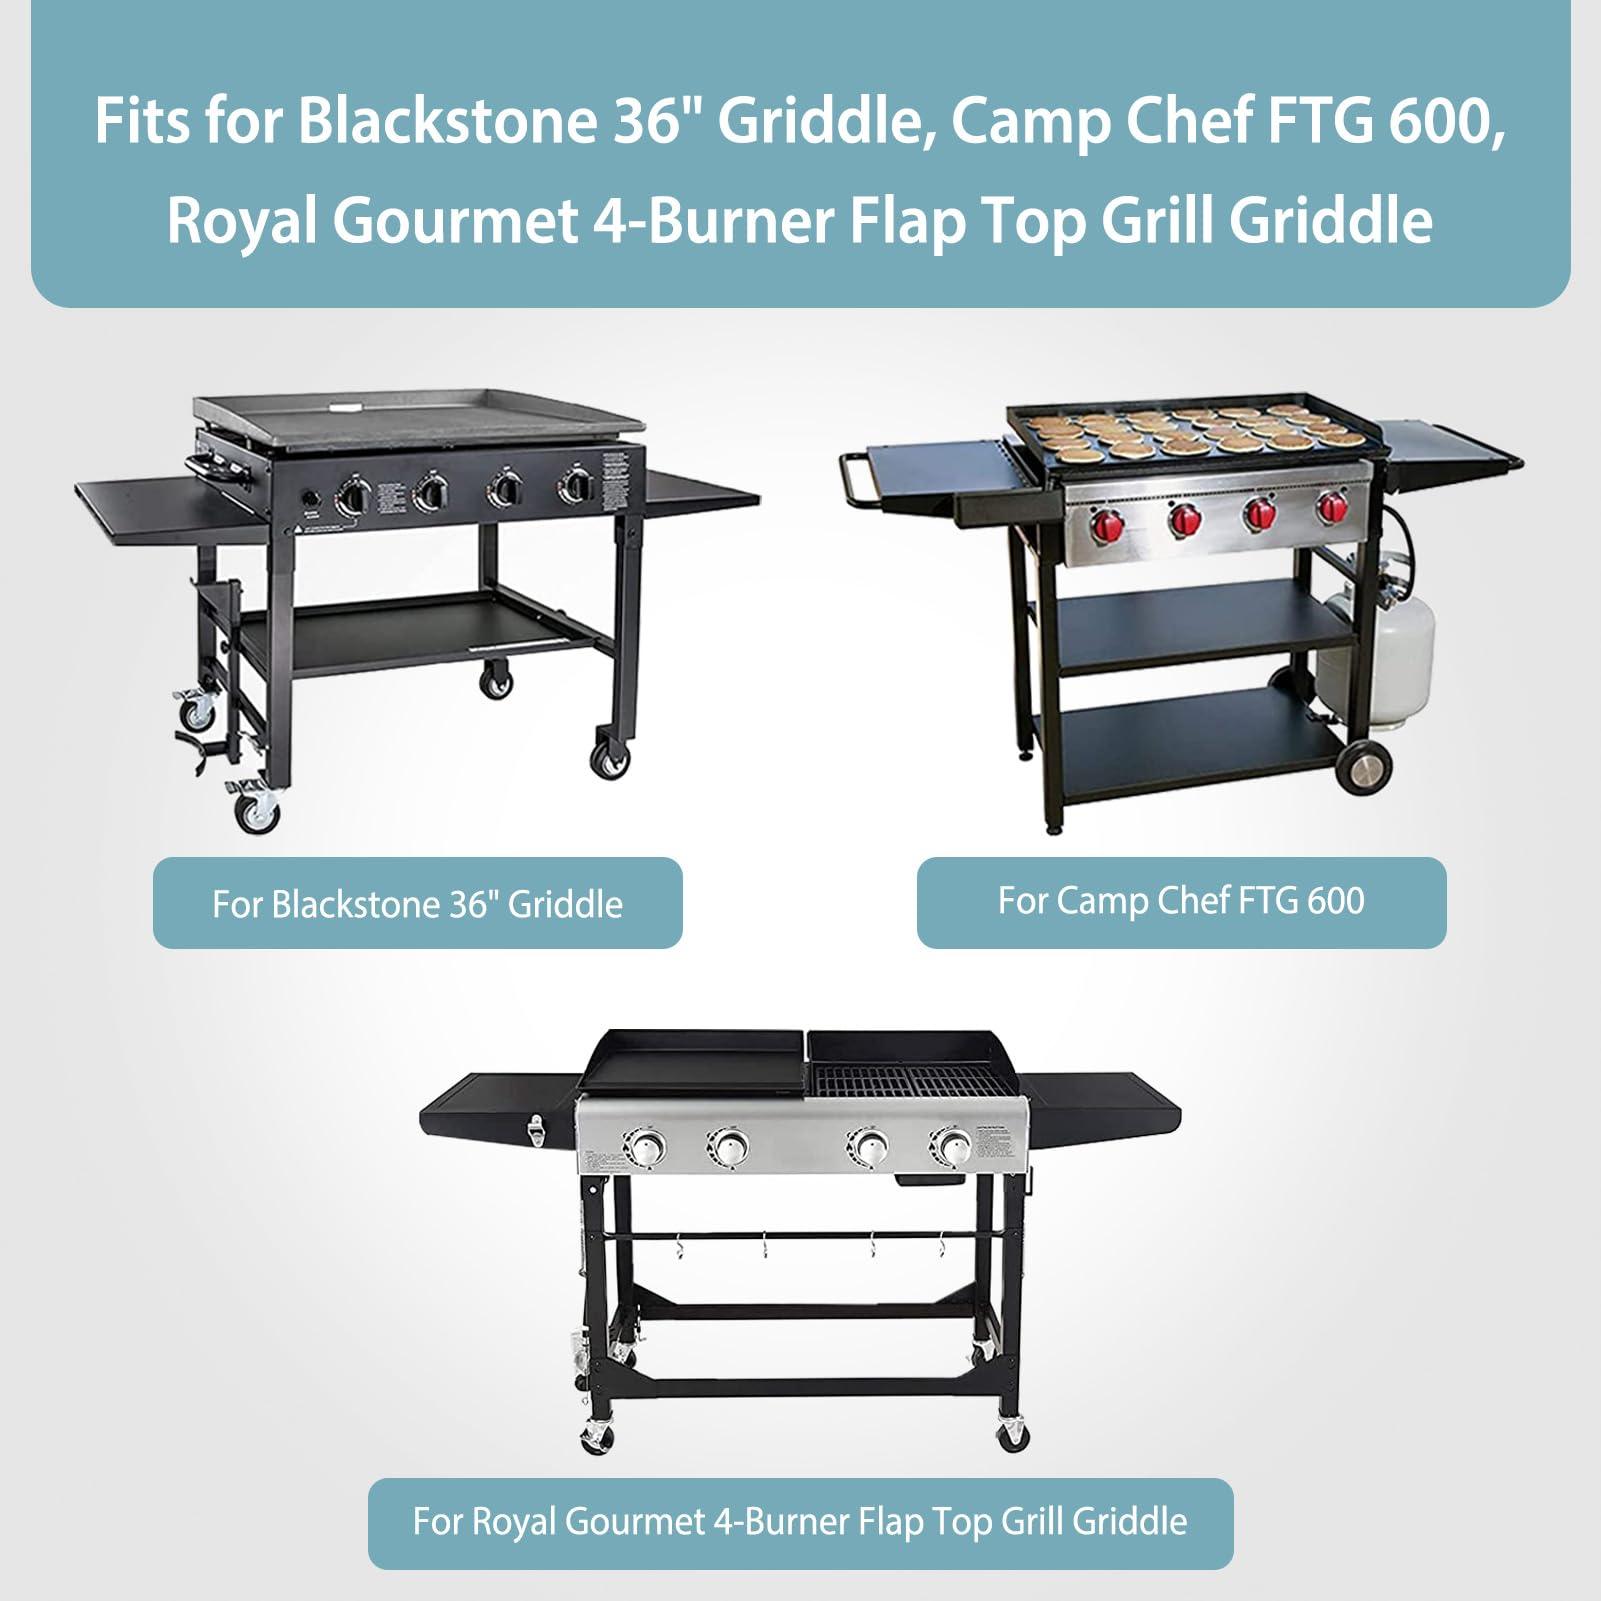 SHINESTAR Griddle Cover for Blackstone 36 Inch Griddle and More 4-Burner Flap Top Grills - Waterproof, Lightweight, Durable - Click-Close Straps - Black - CookCave